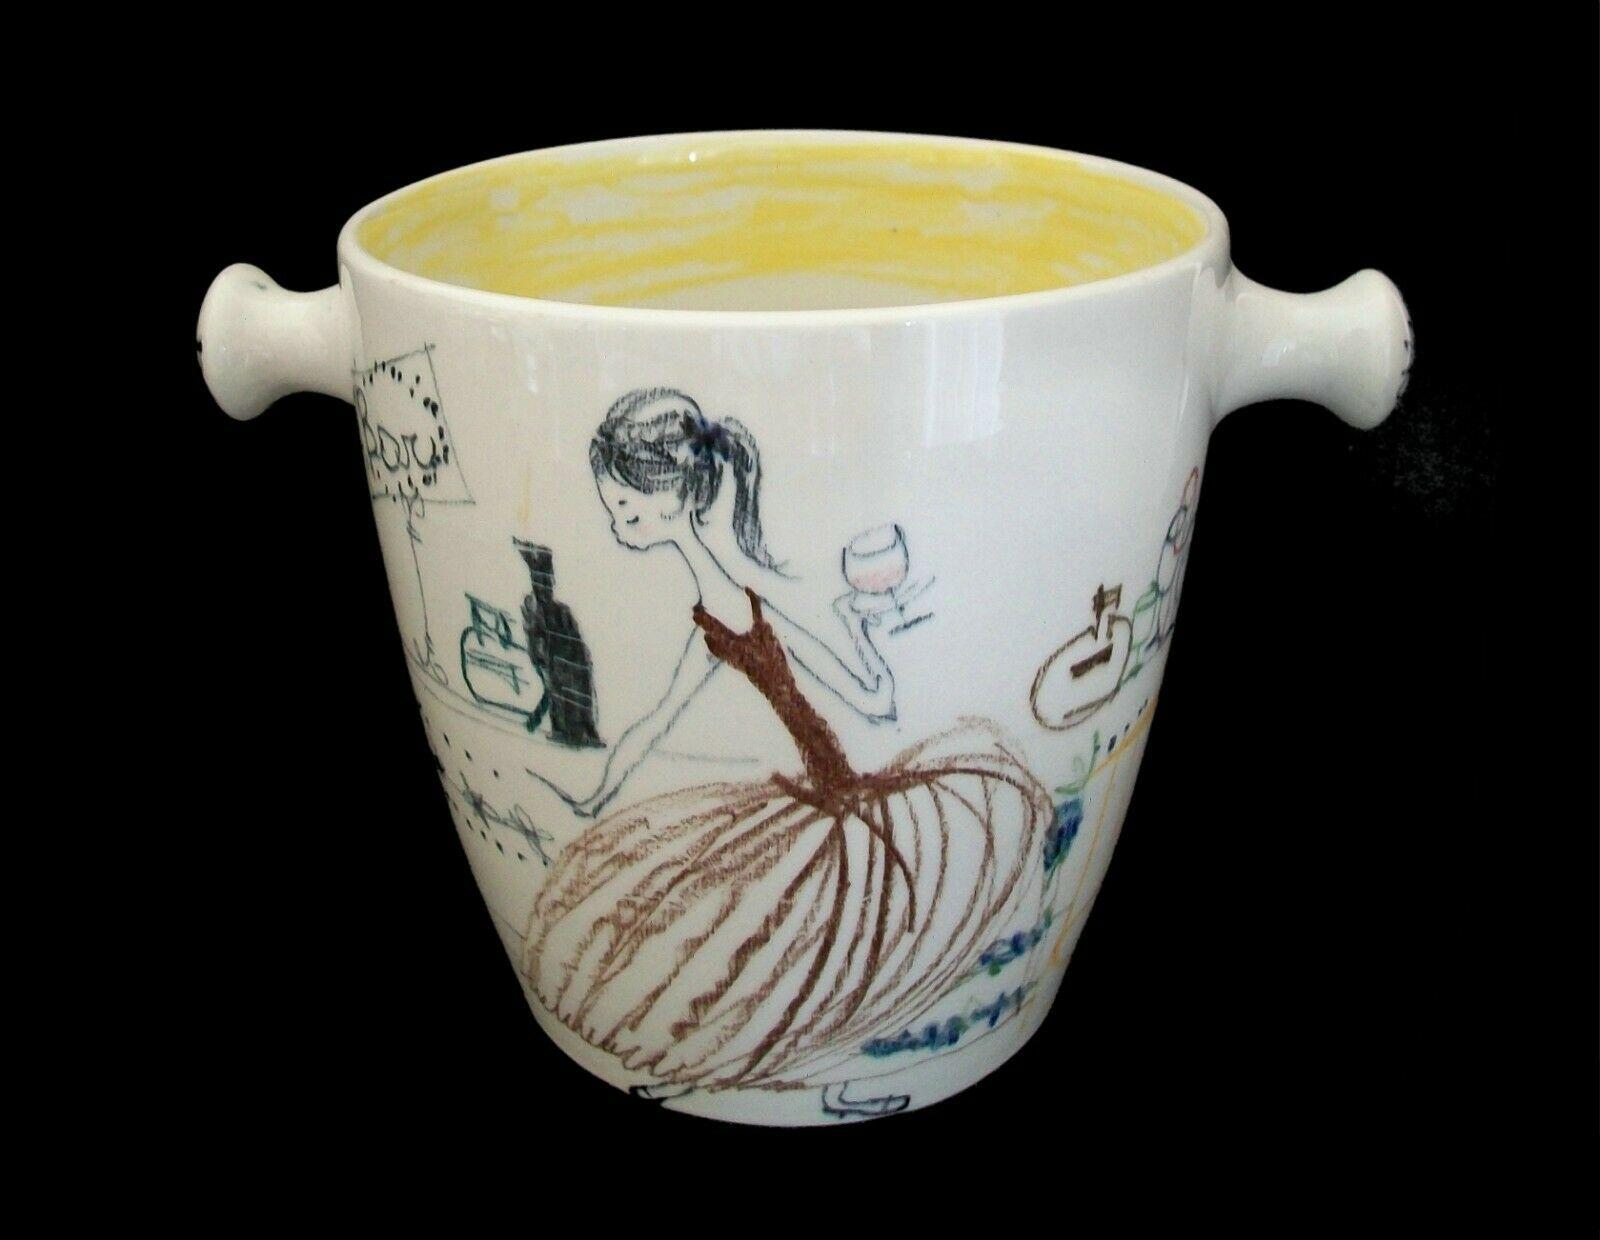 IL QUADRIFOGLIO - mid century studio ceramic twin handled ice bucket - wheel thrown with applied handles - featuring a hand drawn / decorated figure of a young woman at a bar with drink in hand to the front and cocktail names and cherries to the